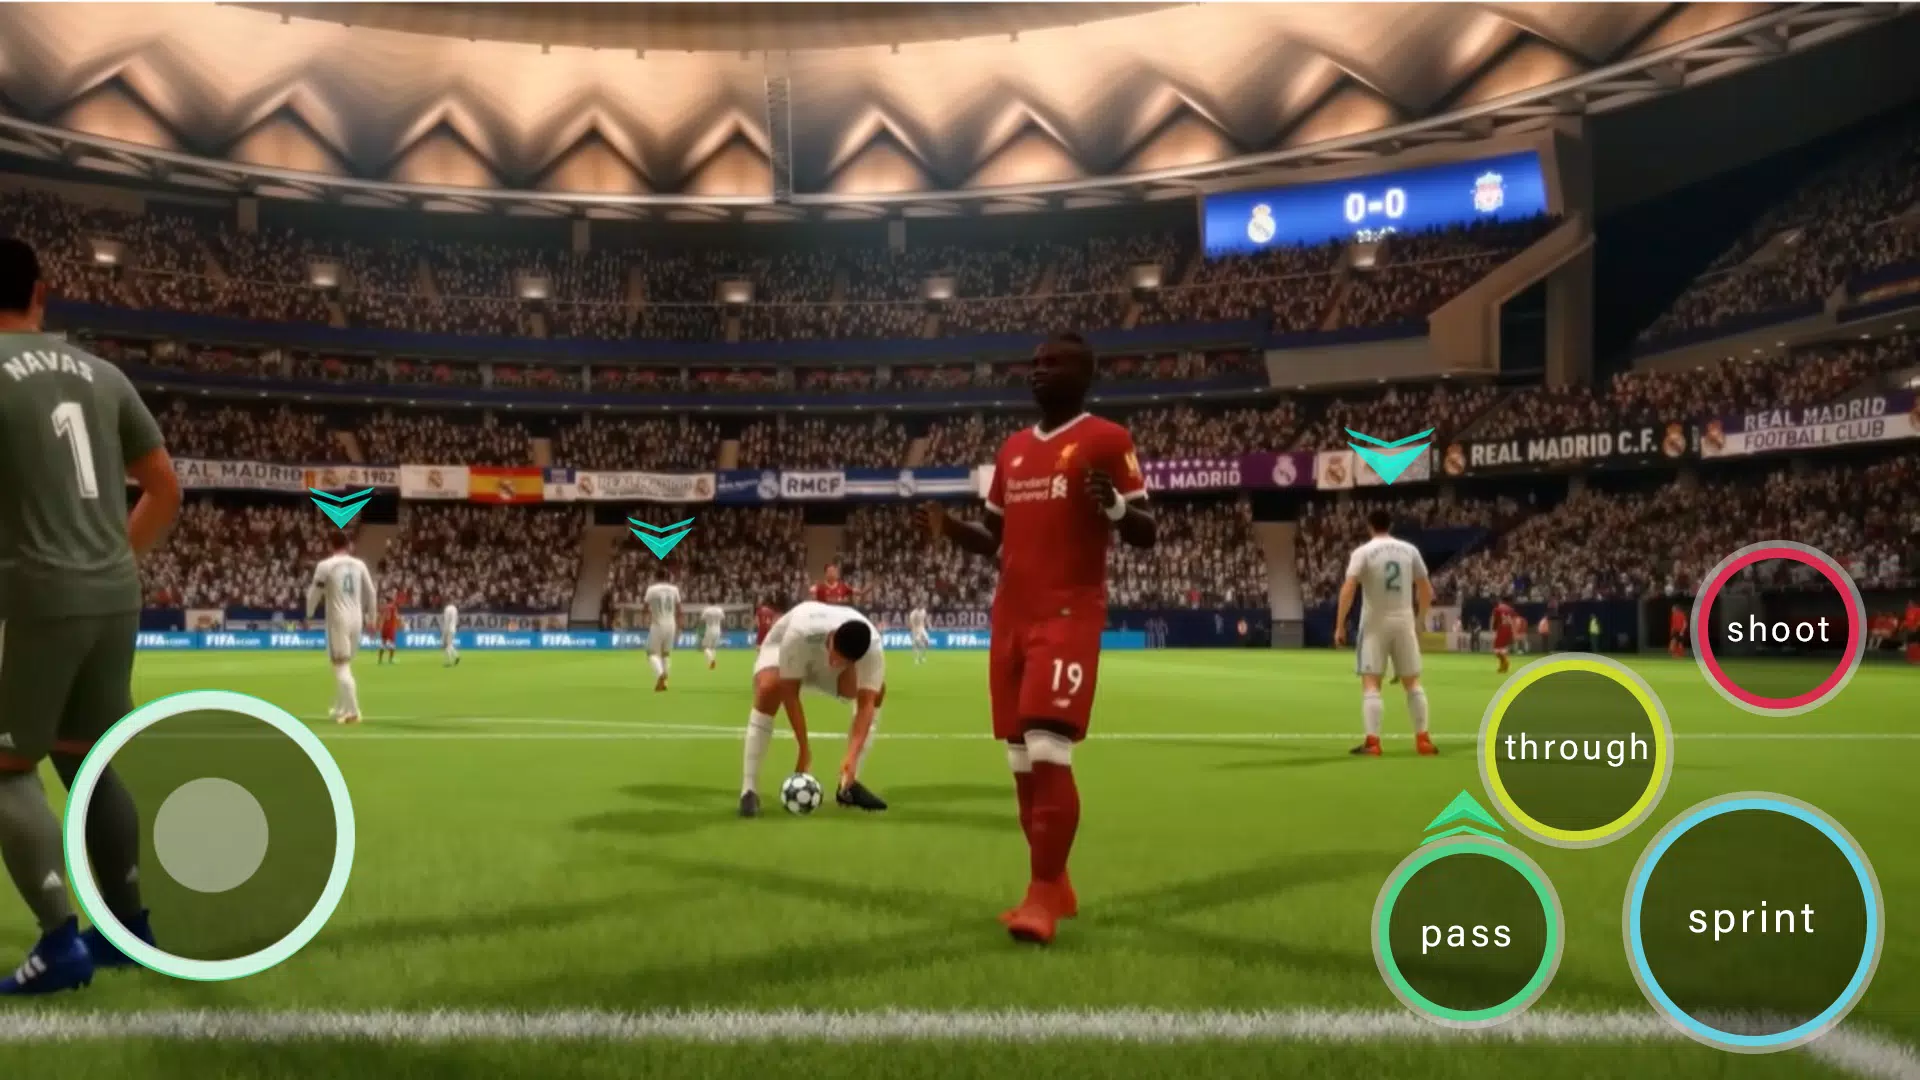 Football League 2023 Gameplay Android 